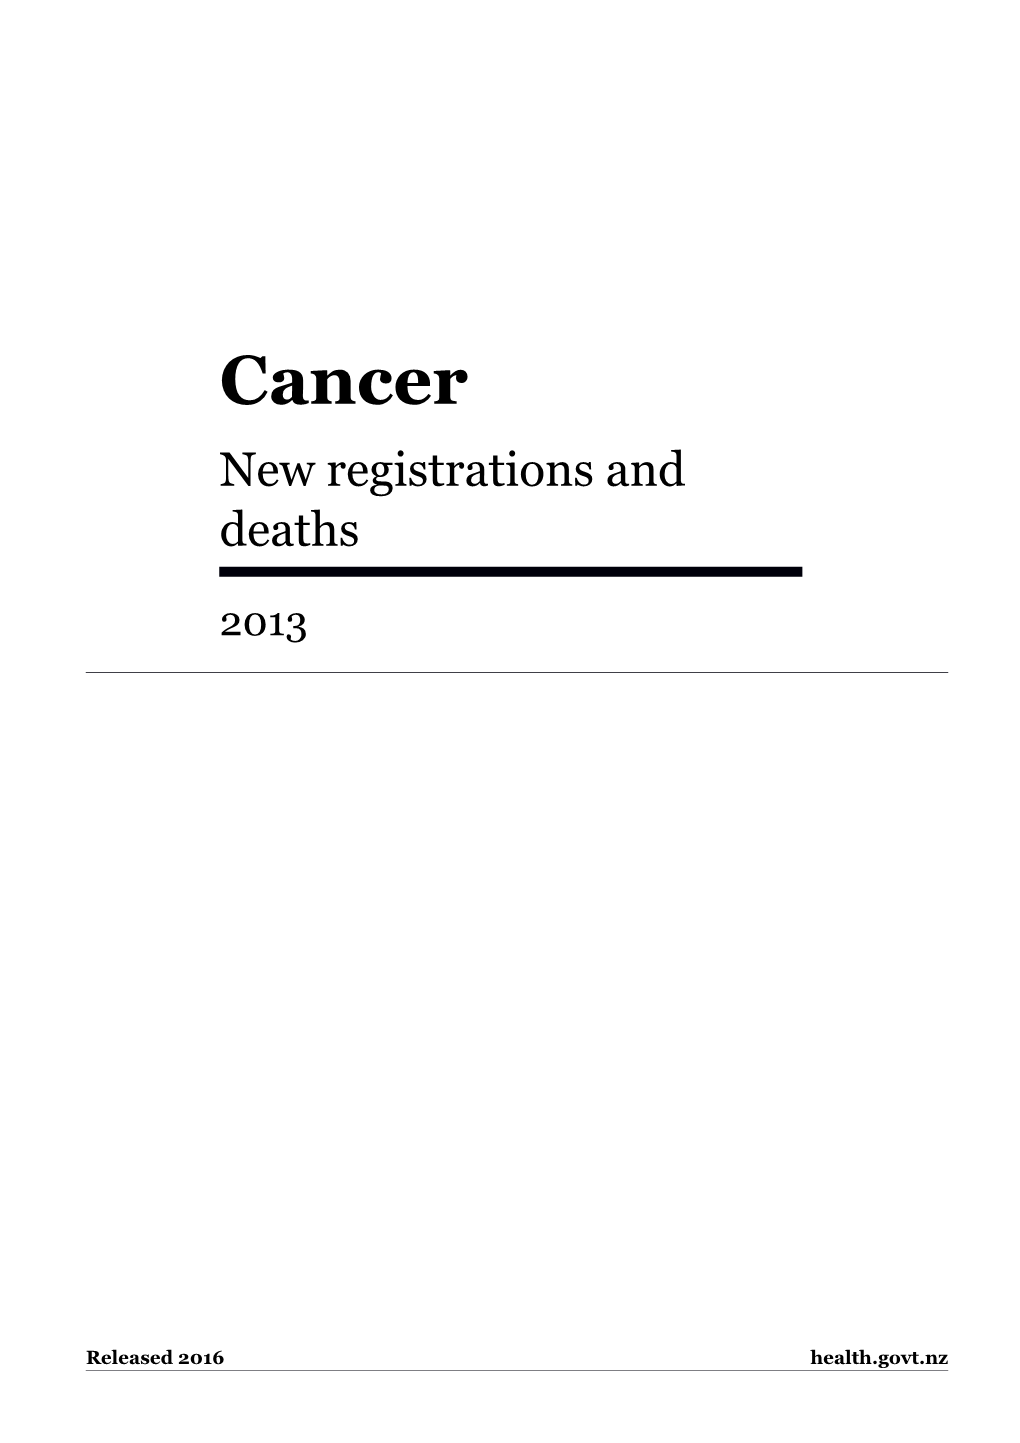 Cancer New Registrations and Deaths 2013